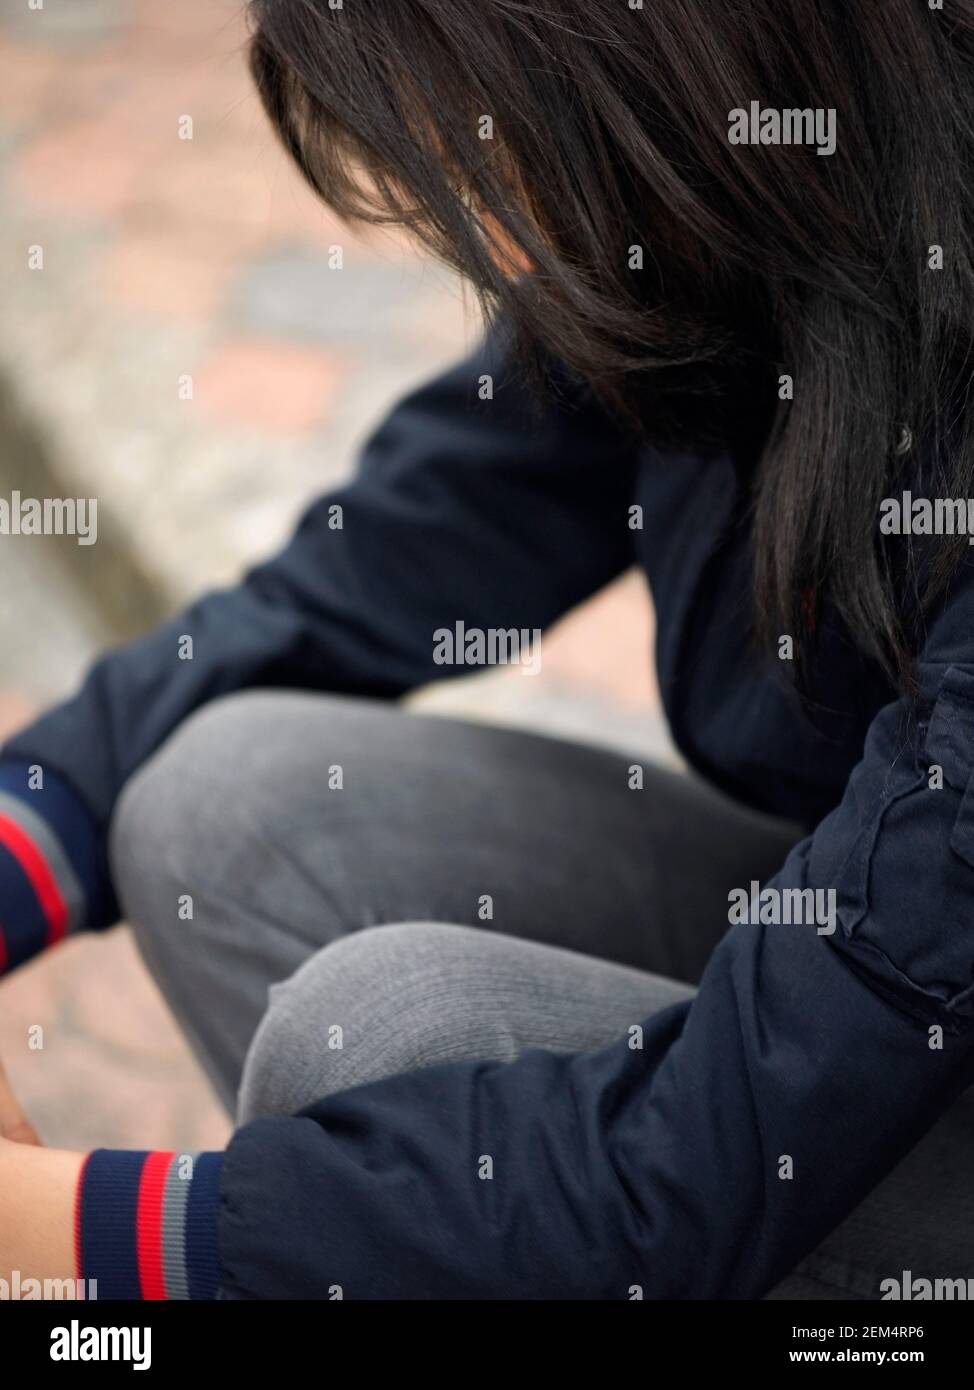 Close-up of a young woman sitting Stock Photo